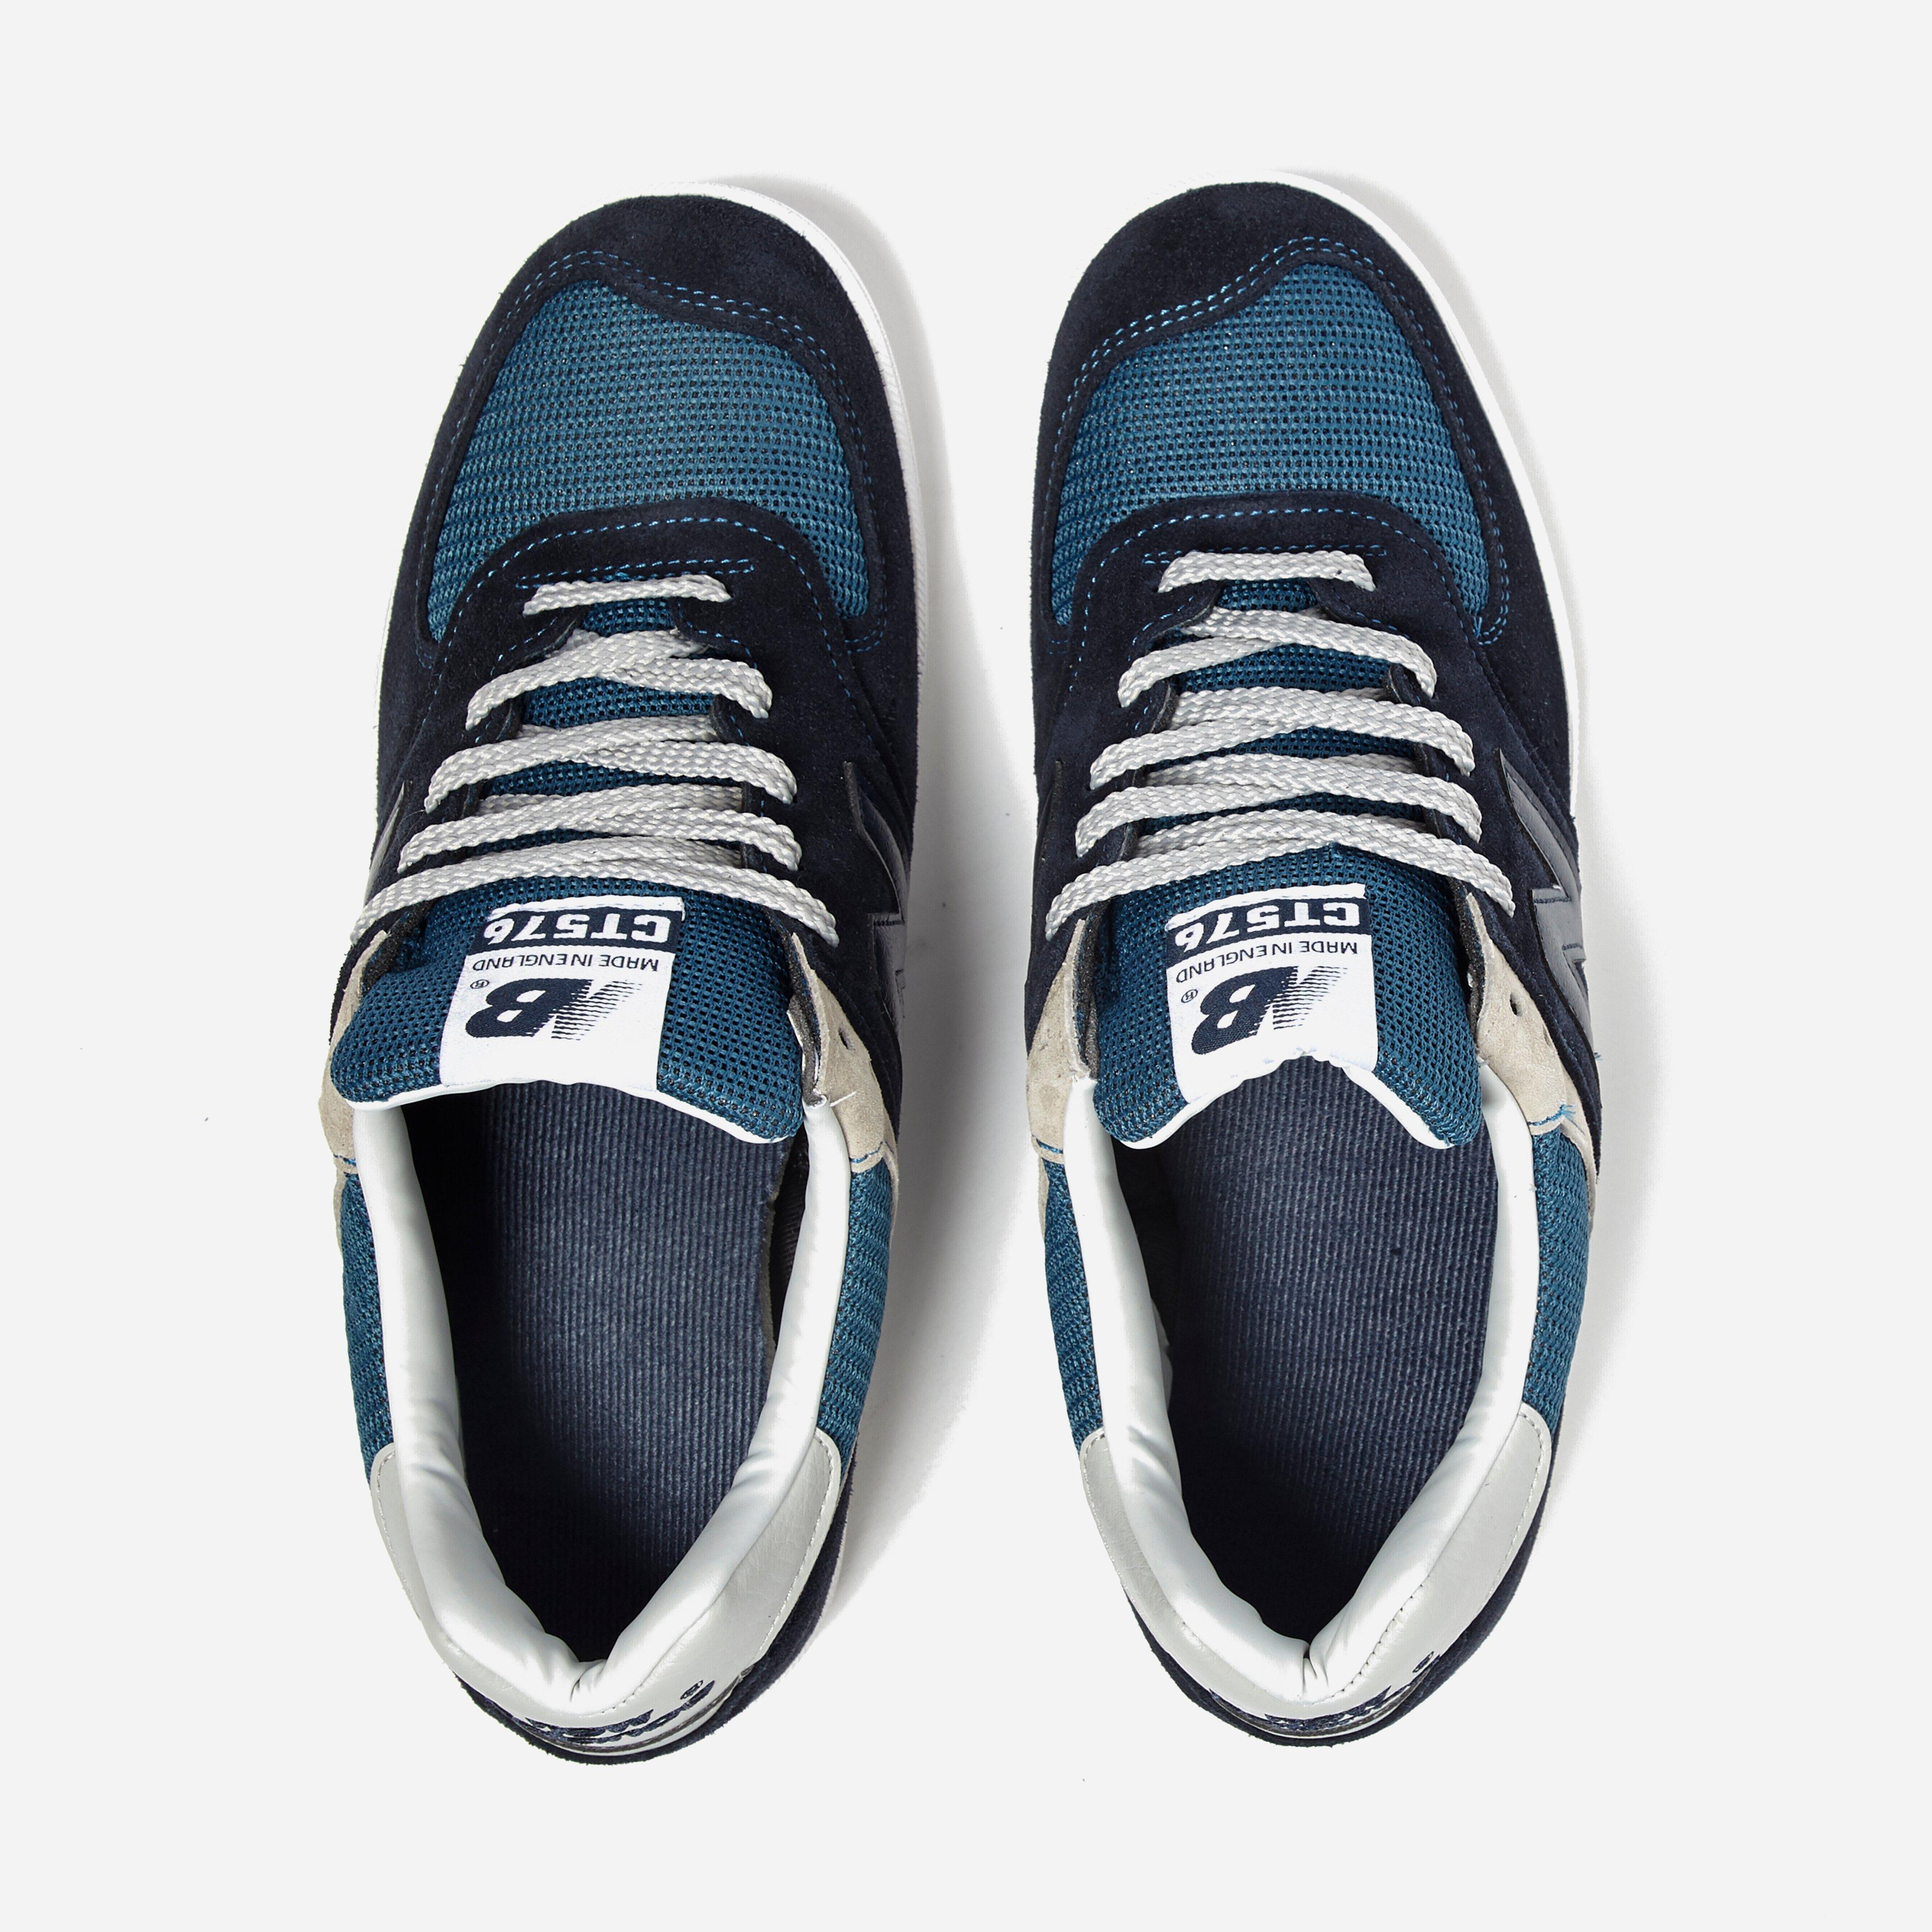 New Balance Suede Ct 576 Ogn Made In England in Blue for Men - Lyst